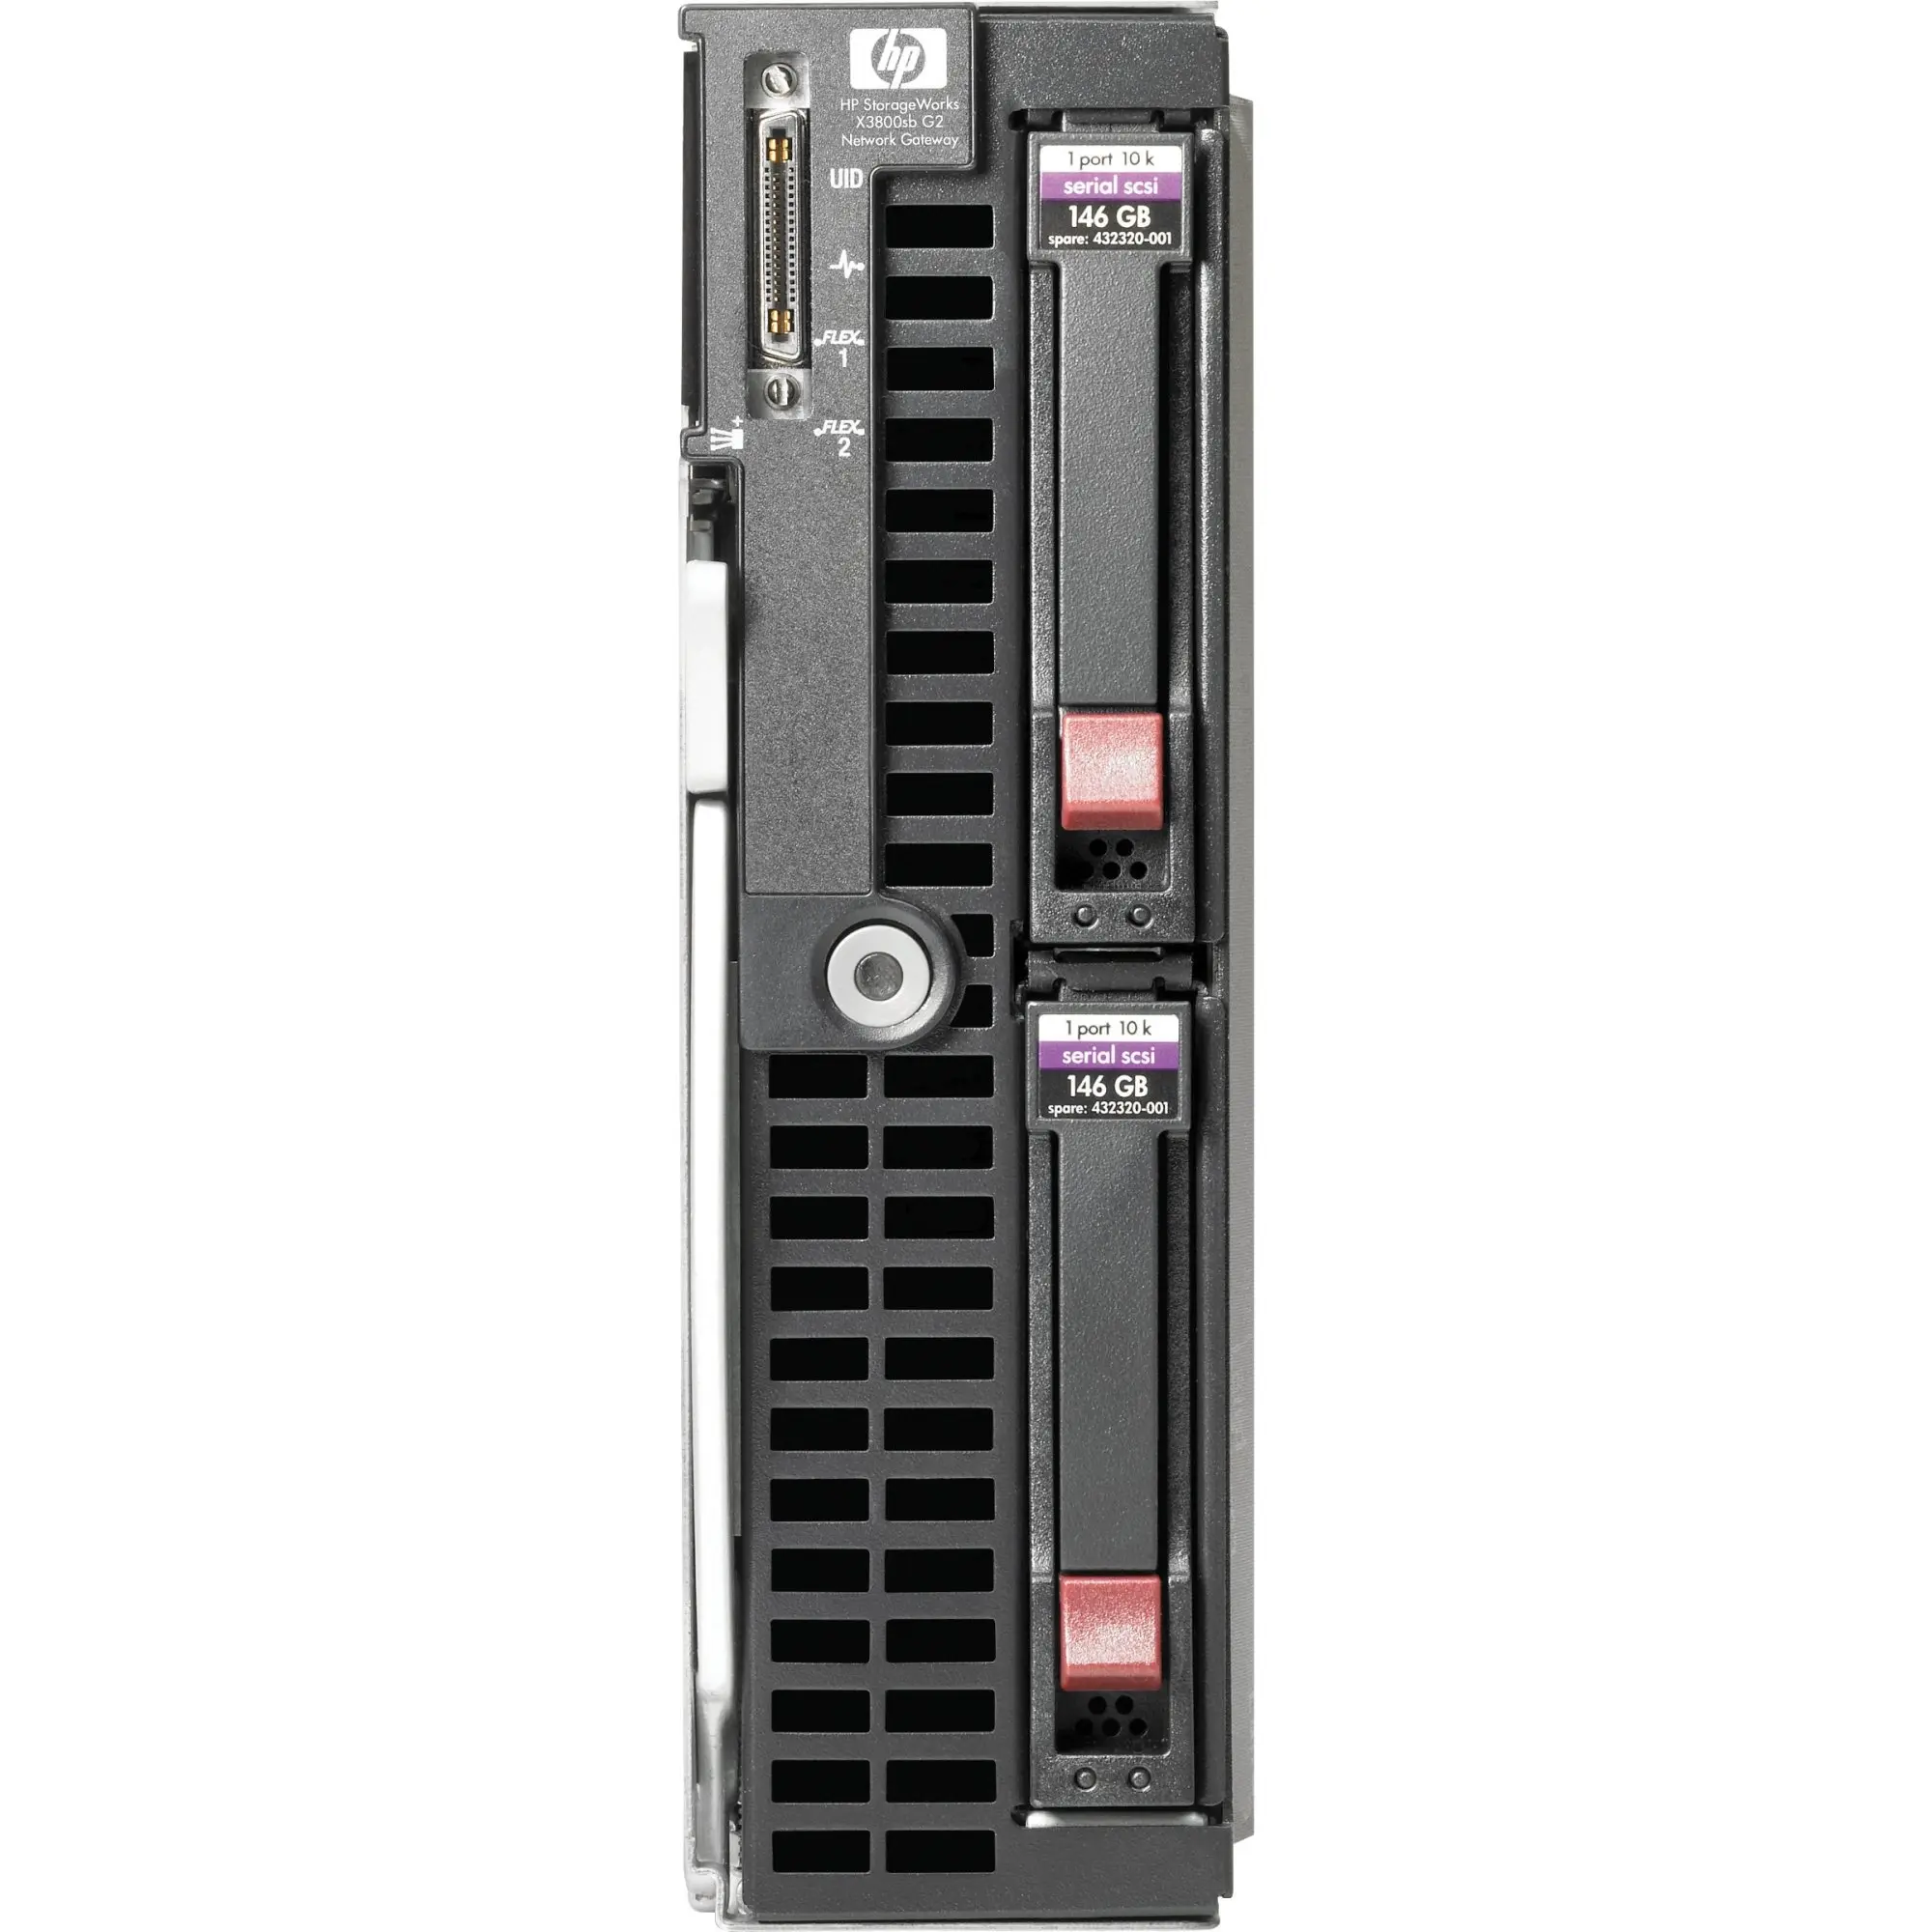 hewlett packard bl460c g7 - What OS is supported by HP ProLiant DL380 G7